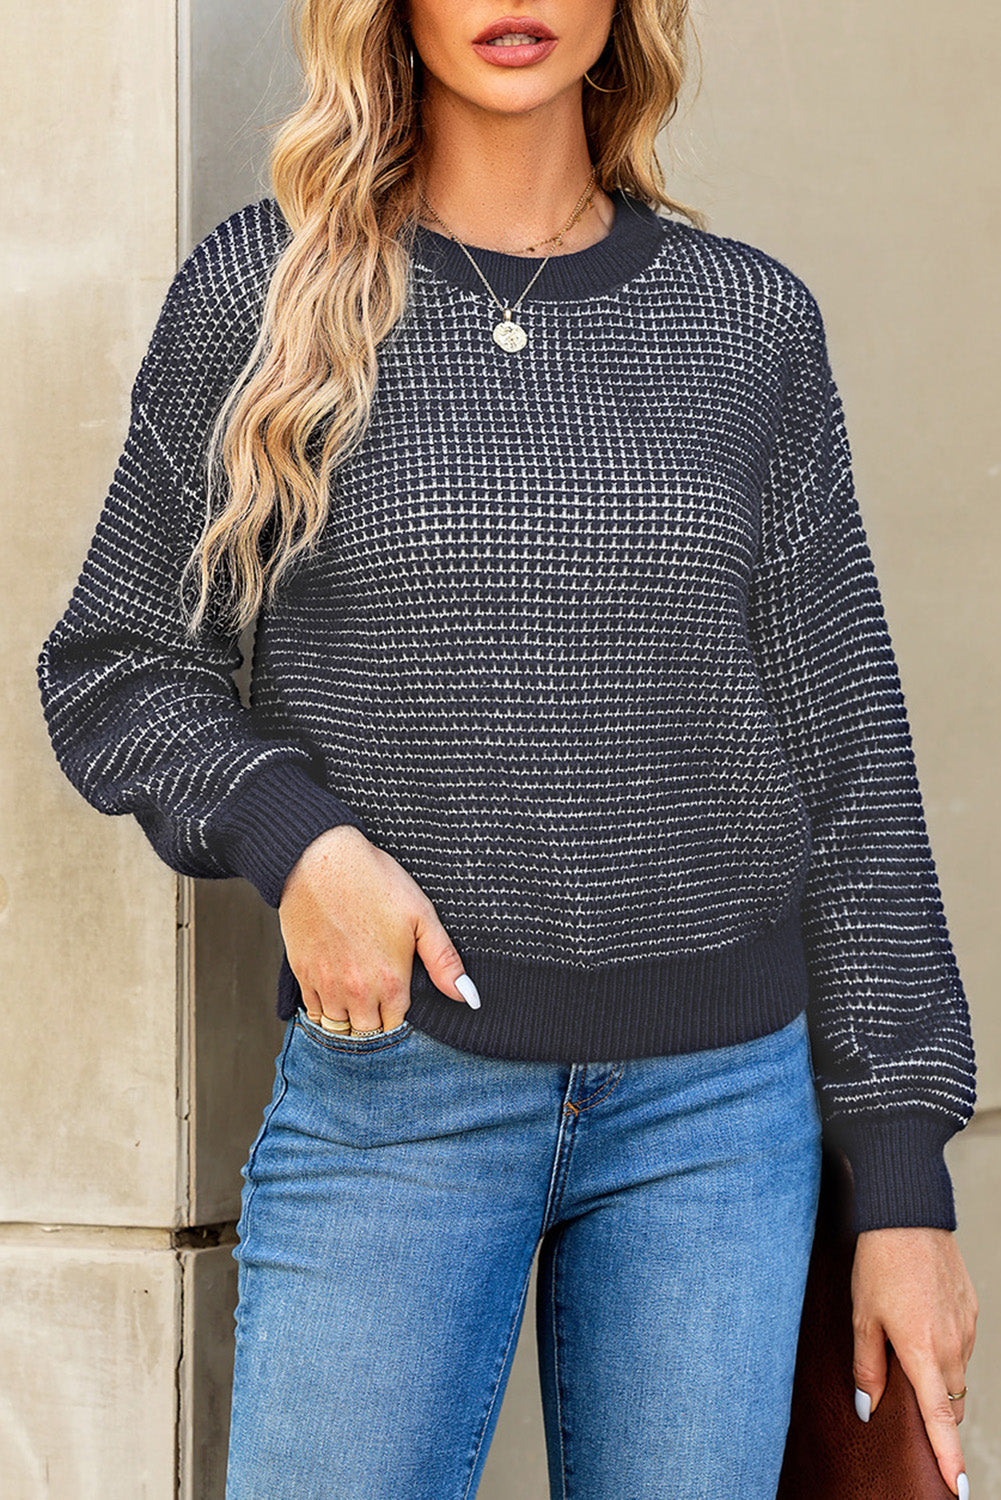 LC2722915-2-S, LC2722915-2-M, LC2722915-2-L, LC2722915-2-XL, LC2722915-2-2XL, Black Heathered Knit Drop Shoulder Puff Sleeve Sweater